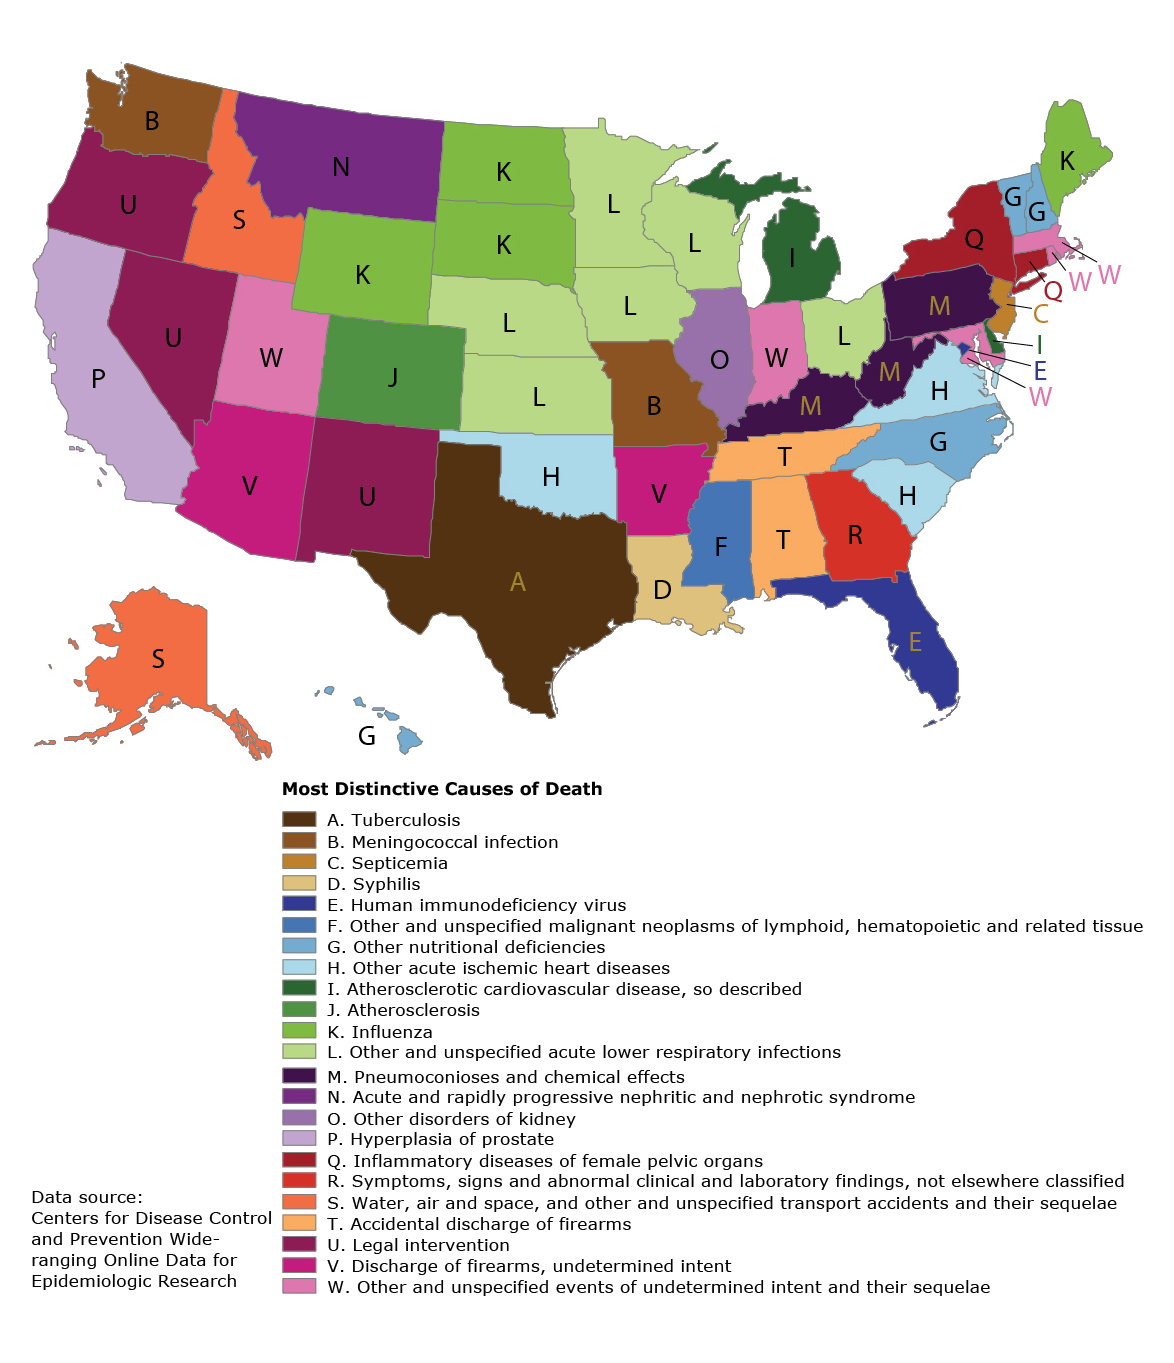 The Most distinctive causes of death by state, 2001-2010